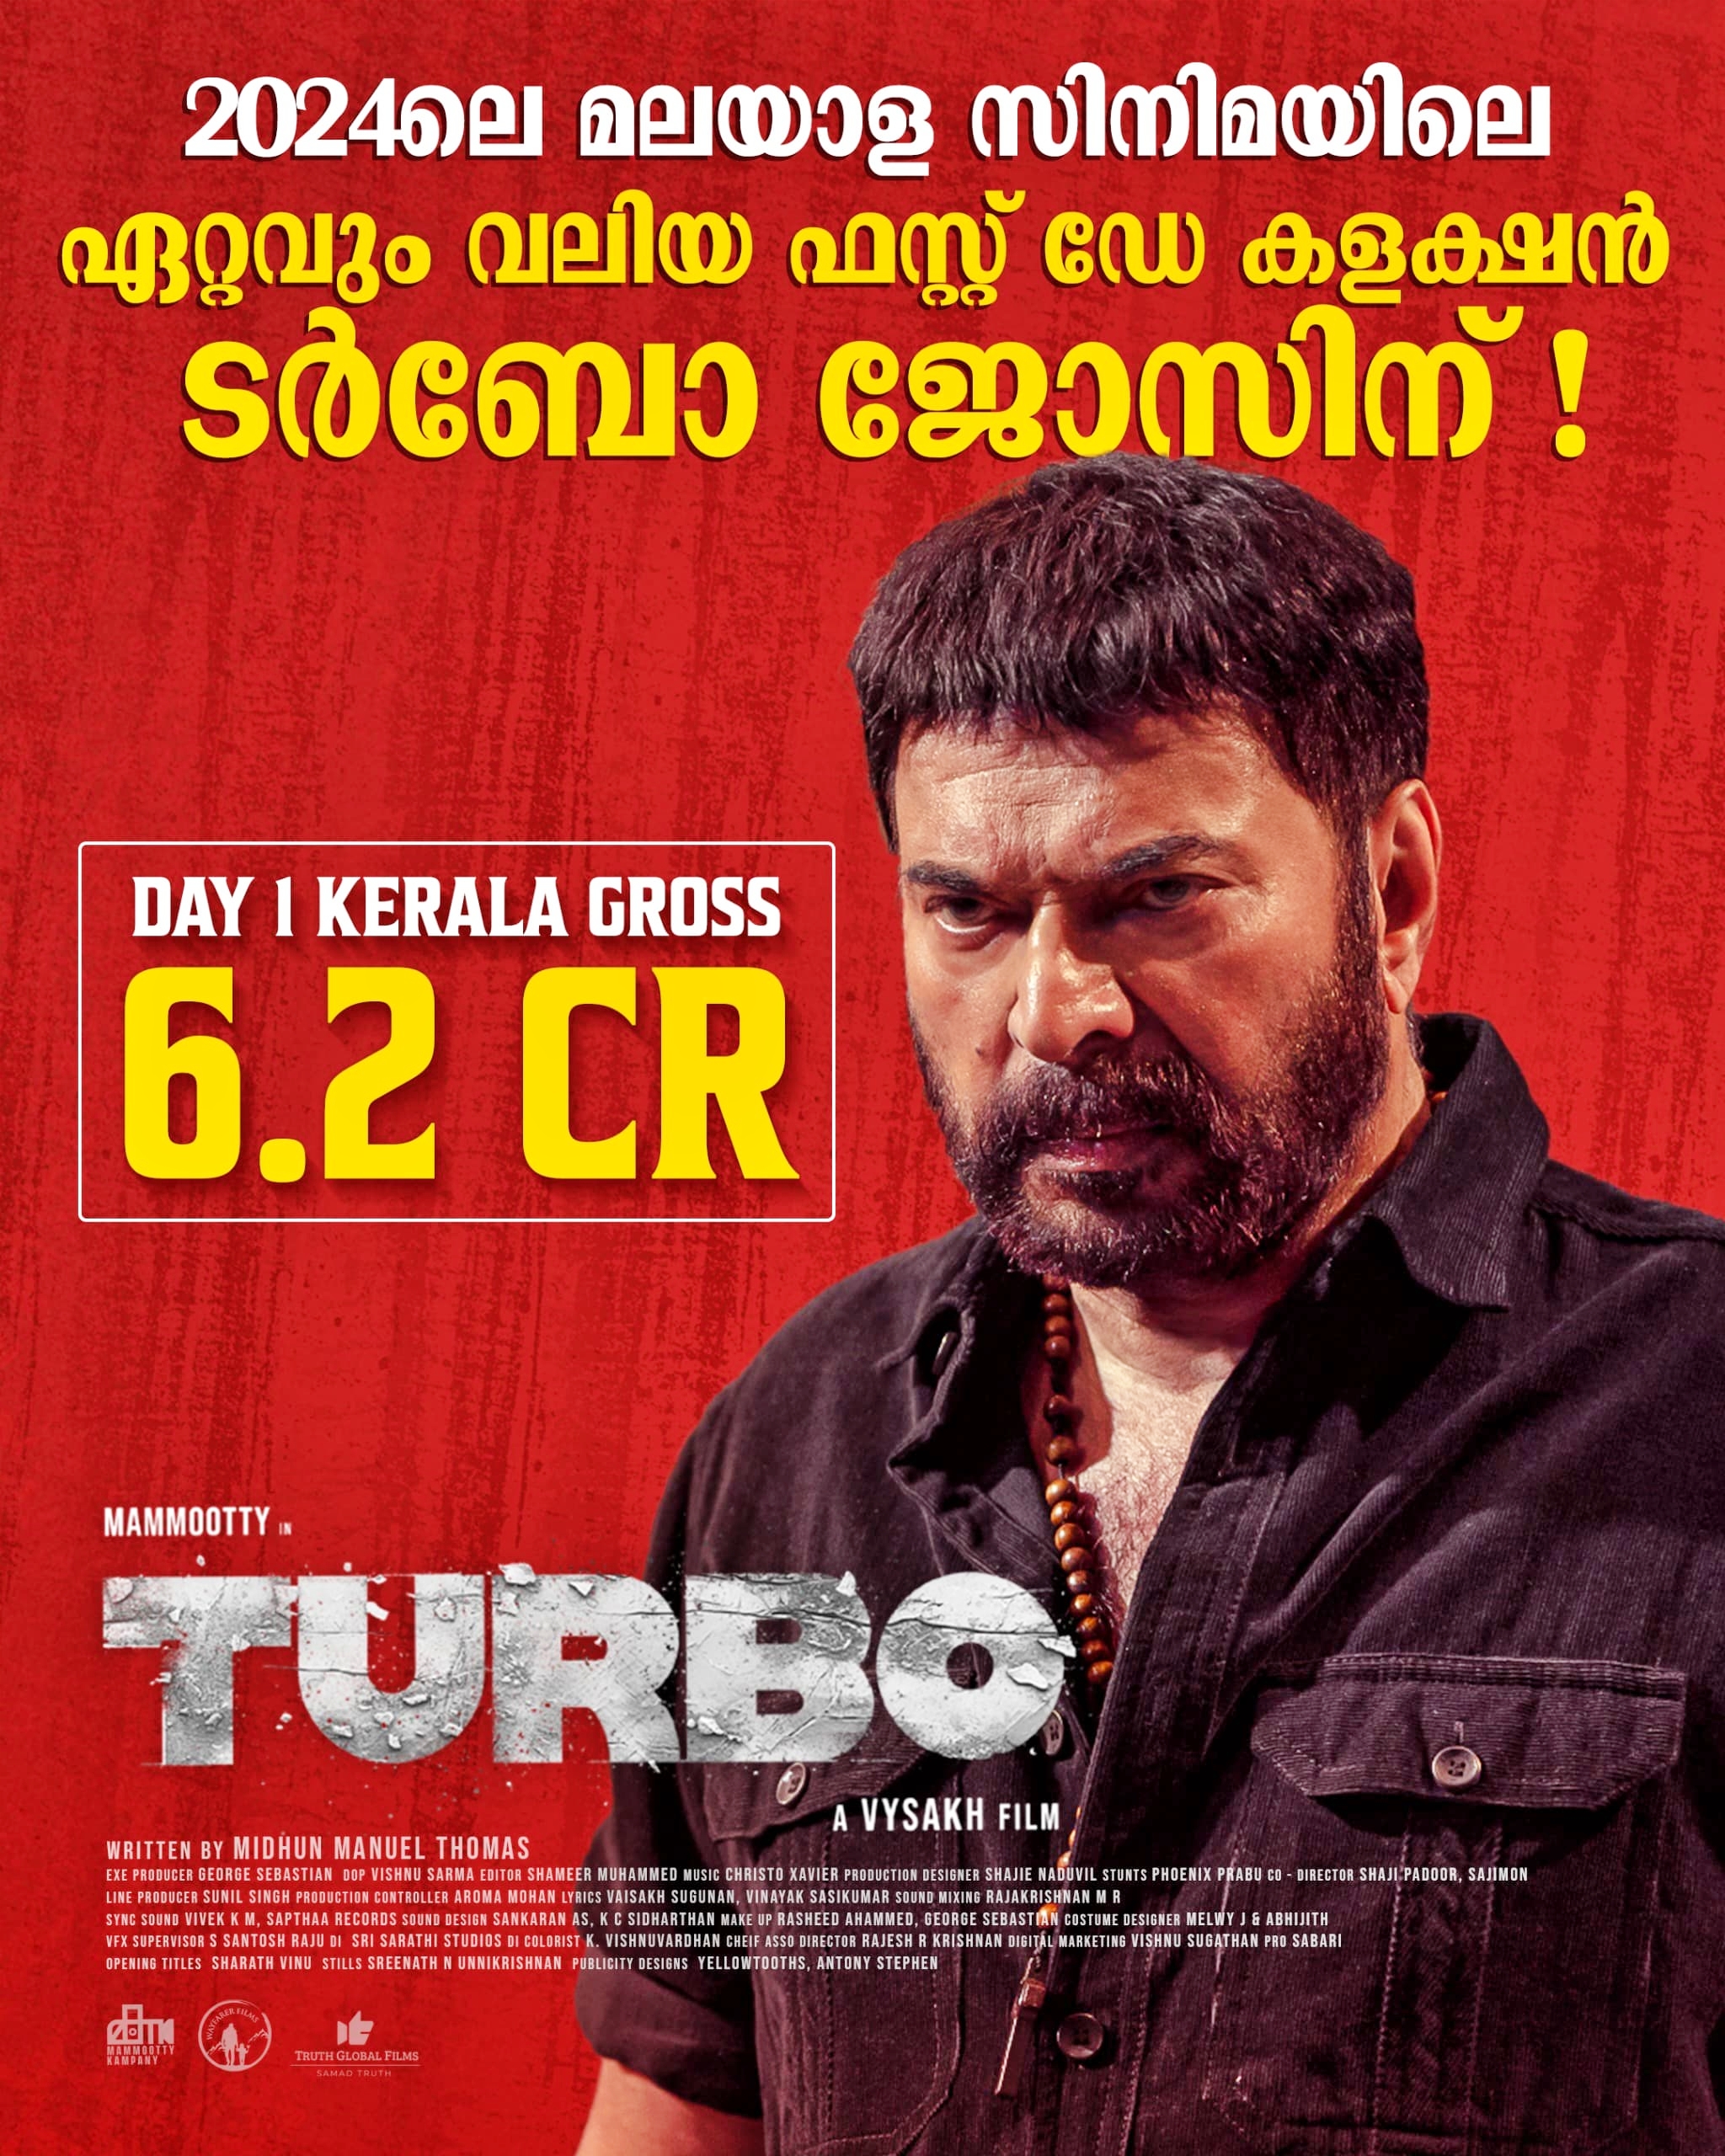 MAMMOOTTY NEW MOVIE  TURBO  TURBO FIRST DAY COLLECTION  TURBO FIRST DAY